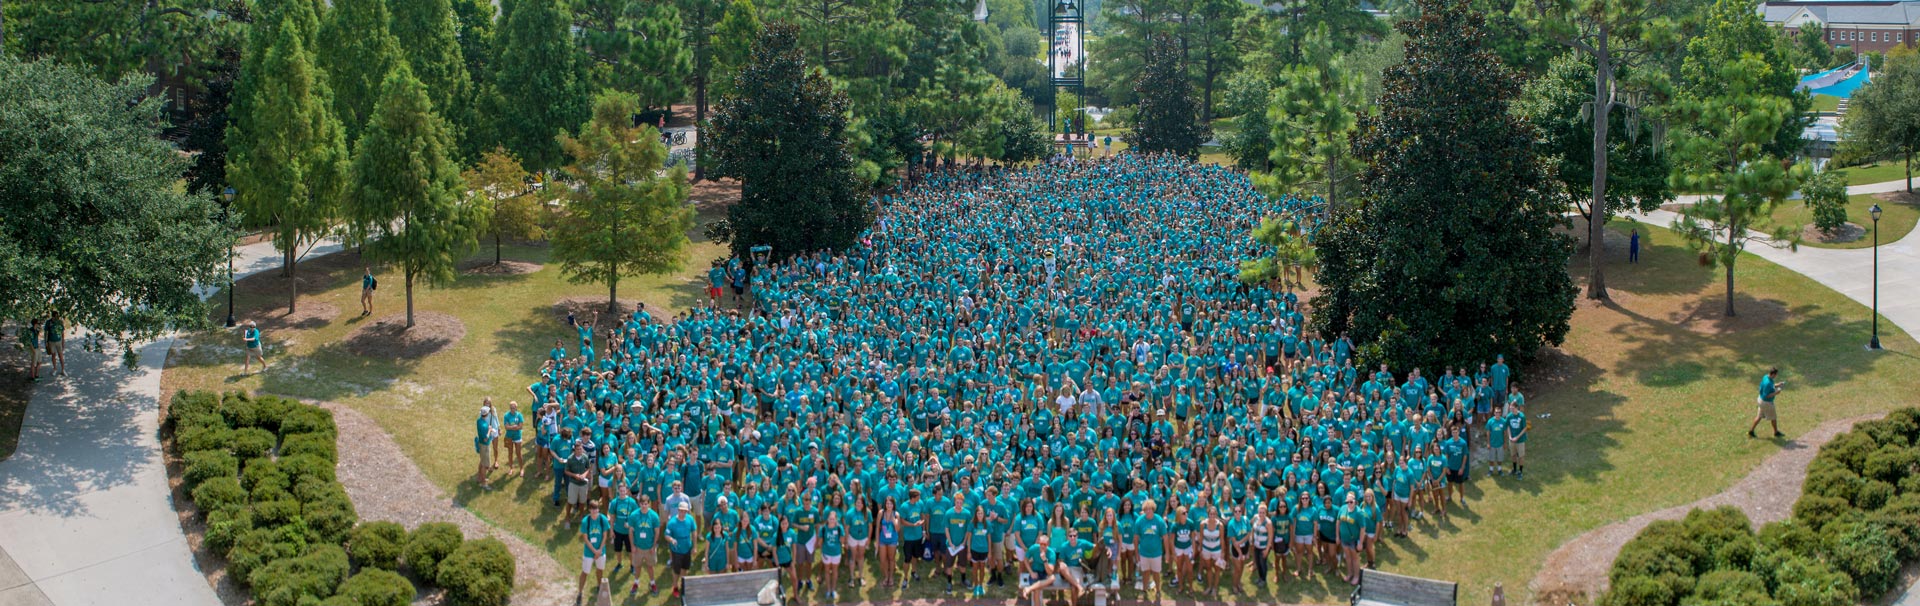 First-Year Students wearing teal take a photo on Convocation day in front of the UNCW clocktower